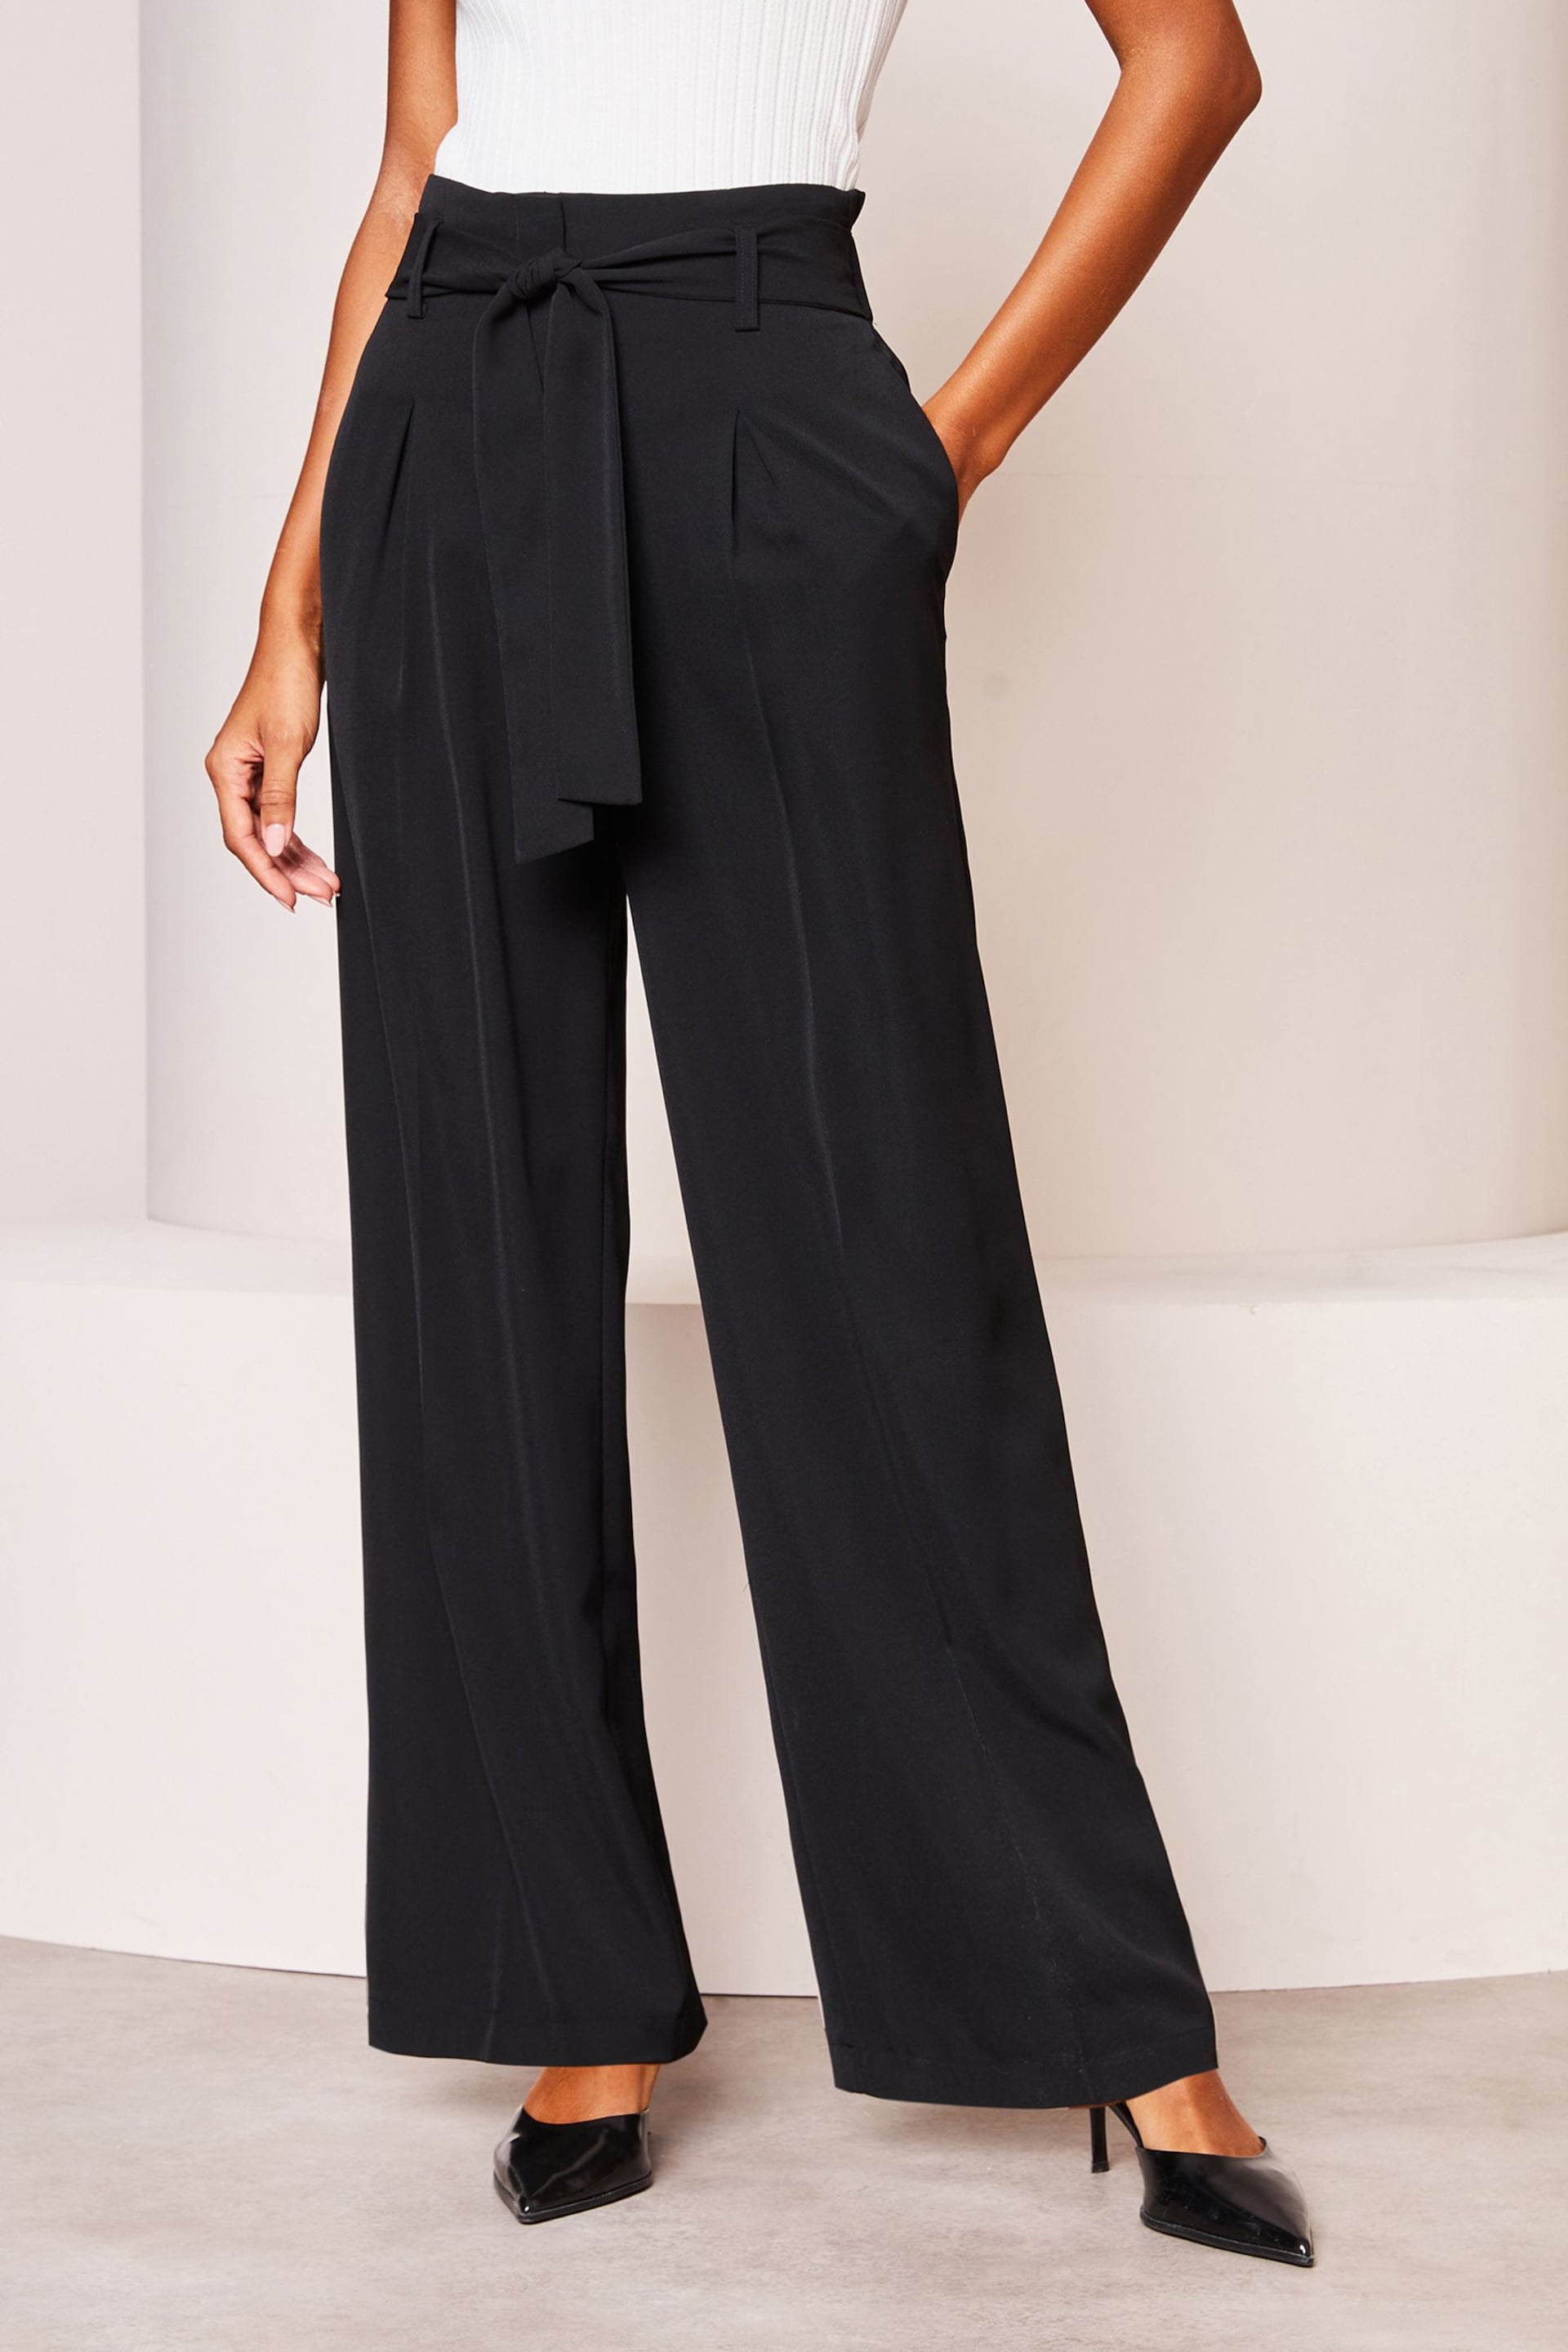 Lipsy Black Belted Wide Leg Trousers - Image 1 of 4